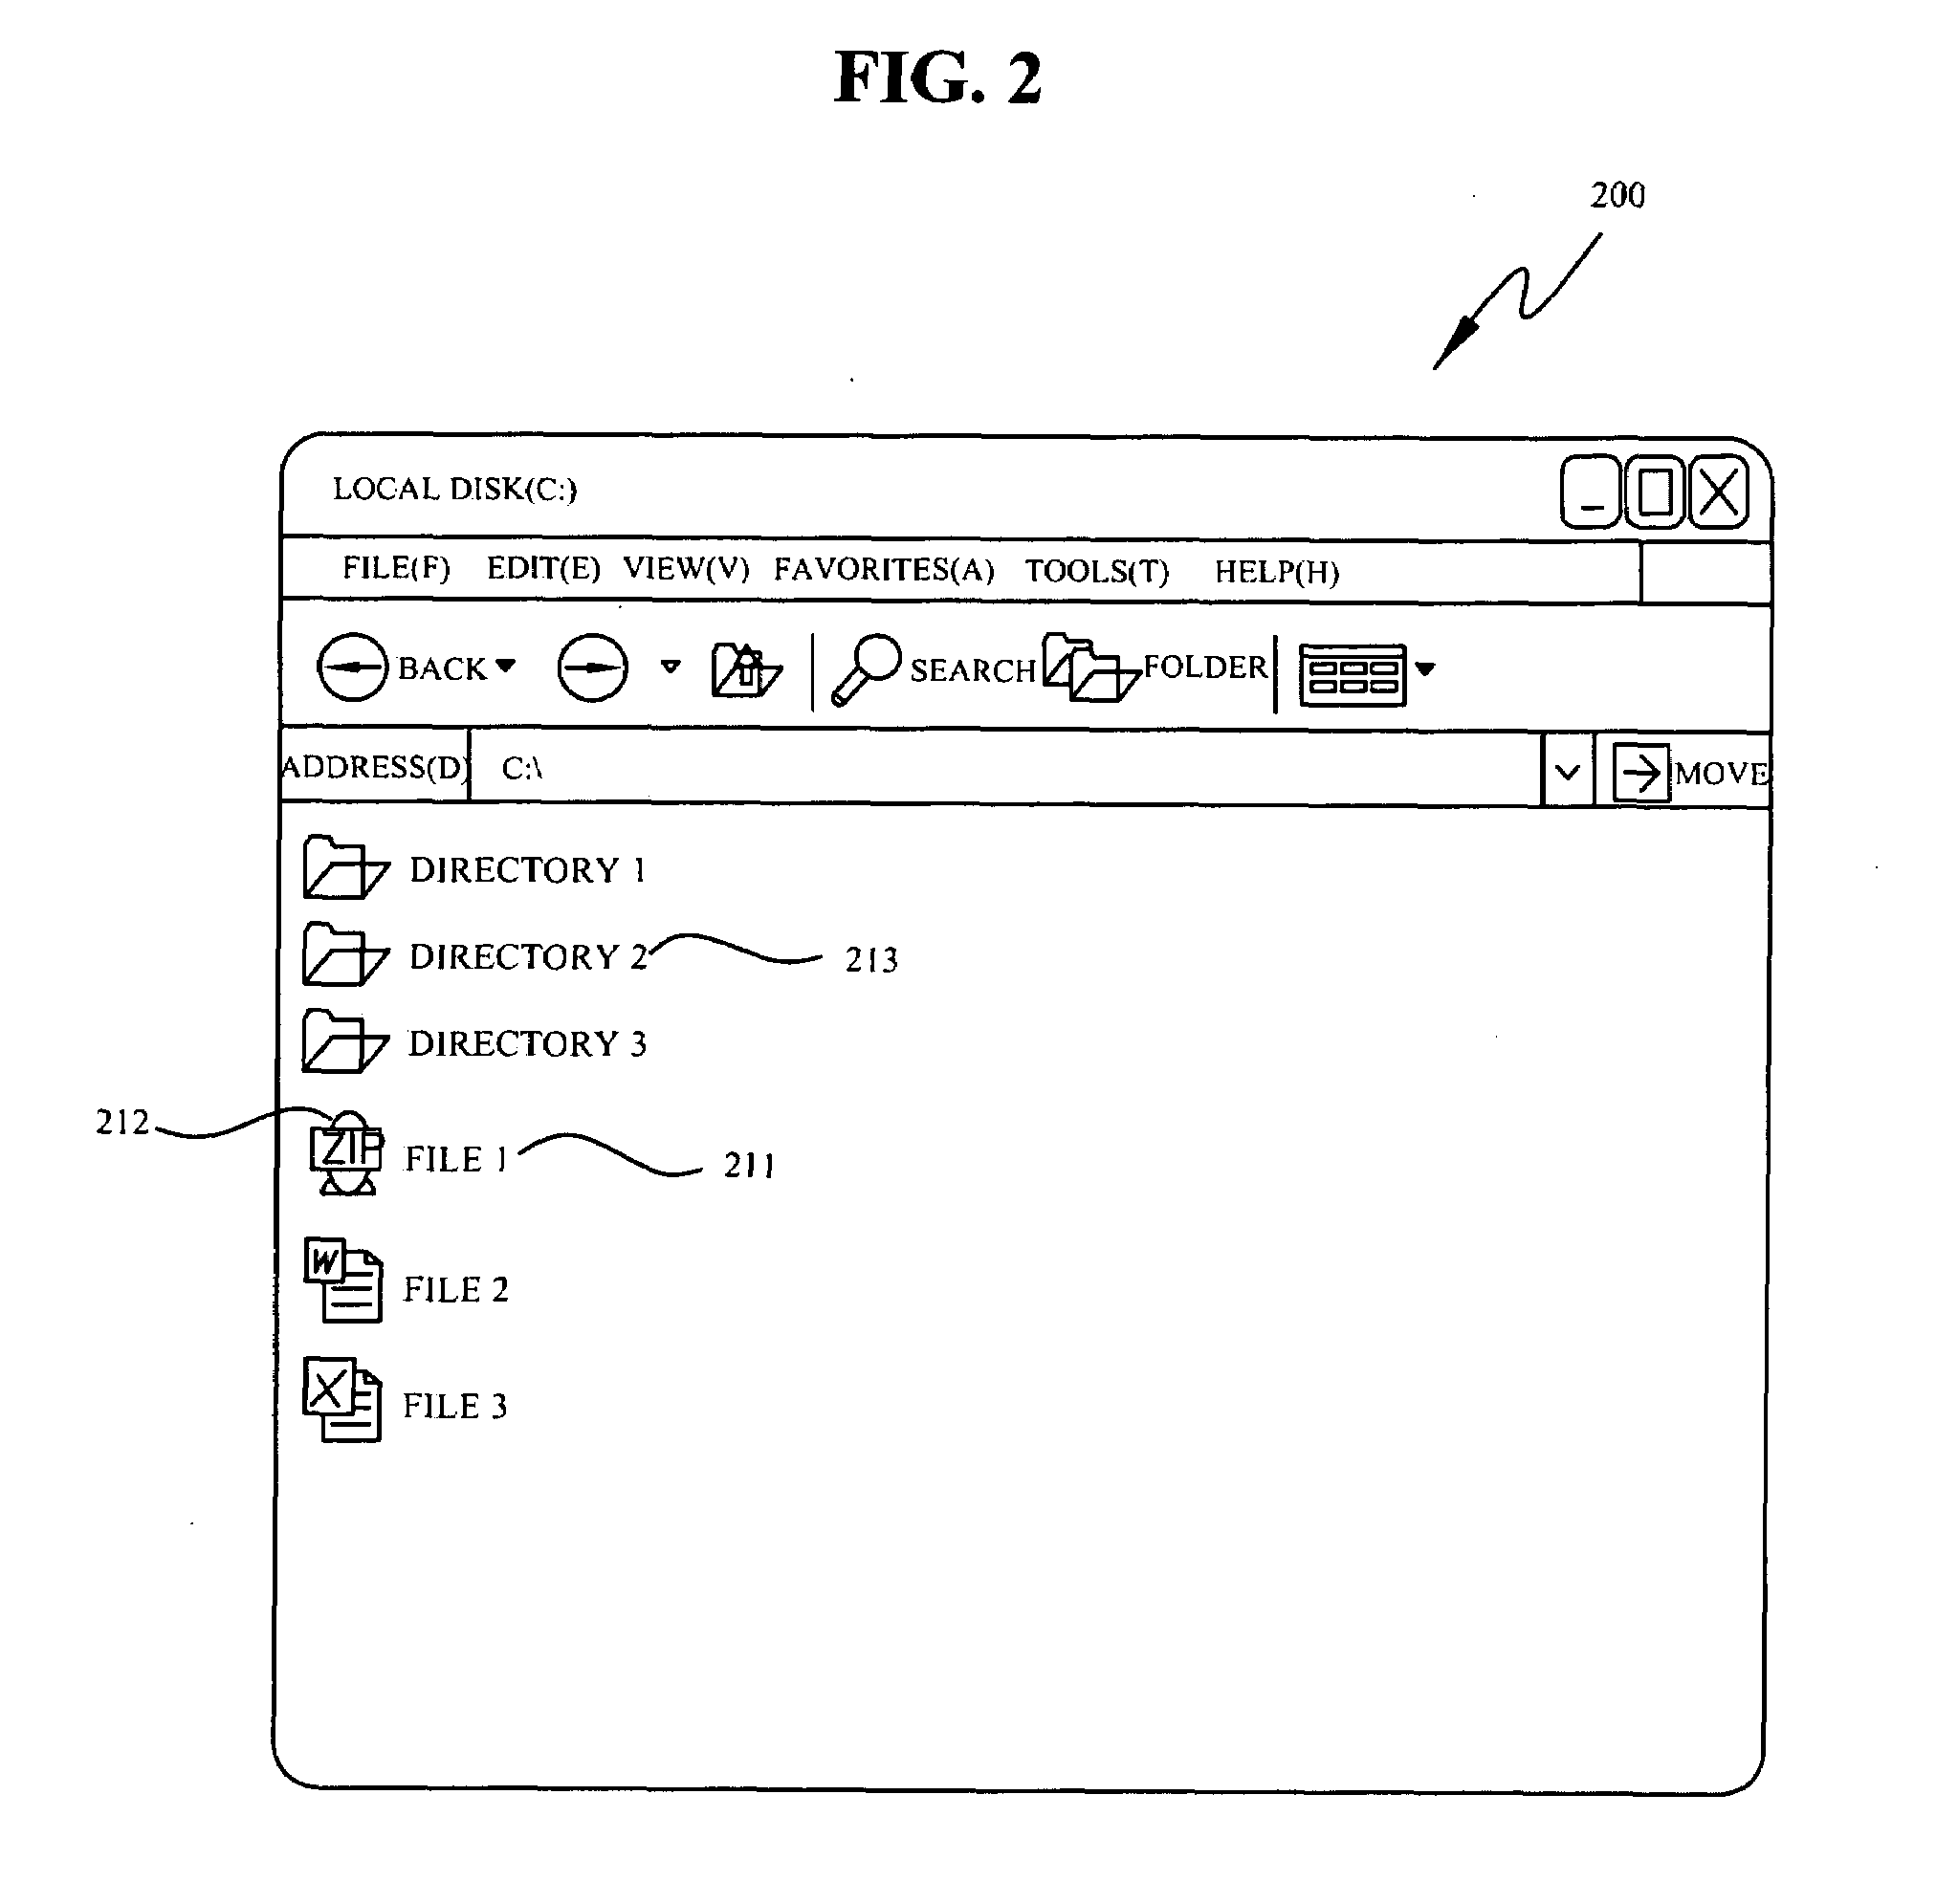 Apparatus and method for providing user interface for file search